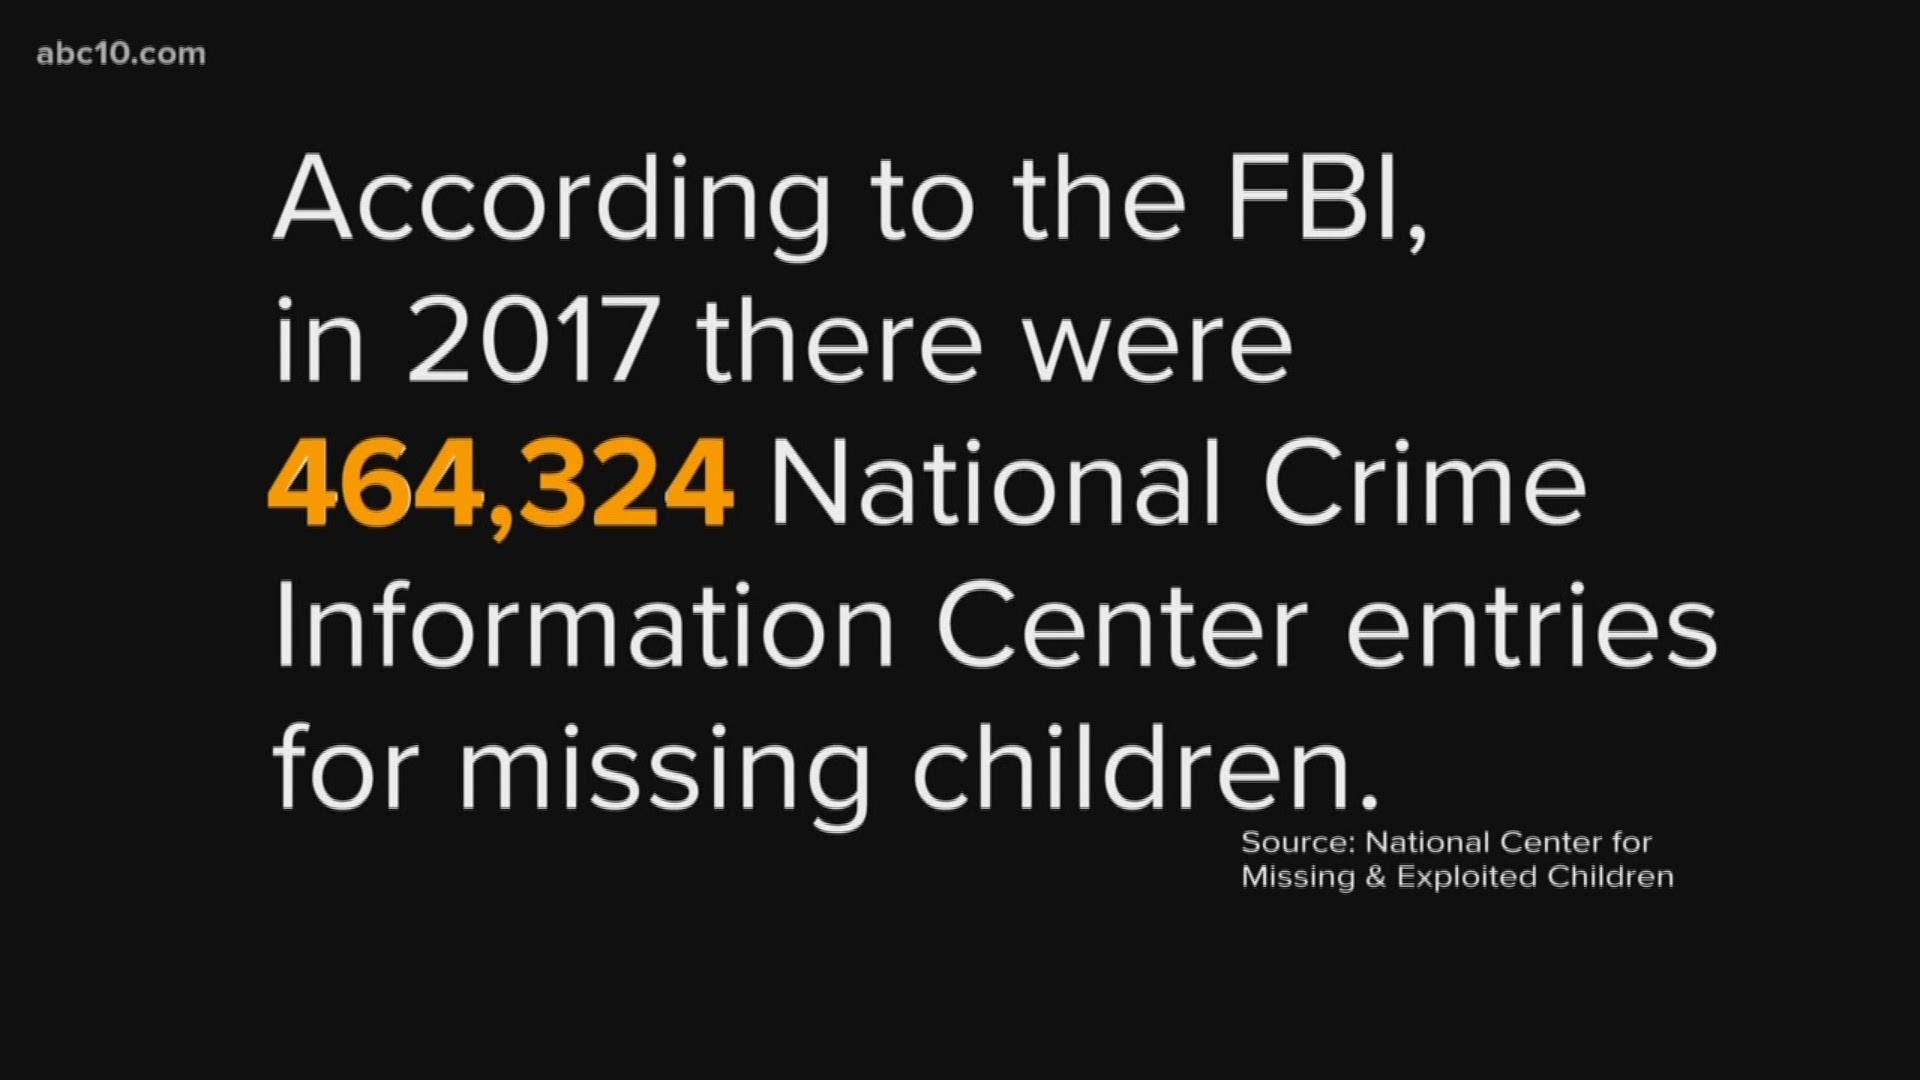 According to the FBI, in 2017, there were 464,324 National Crime Information Center entries for missing children.